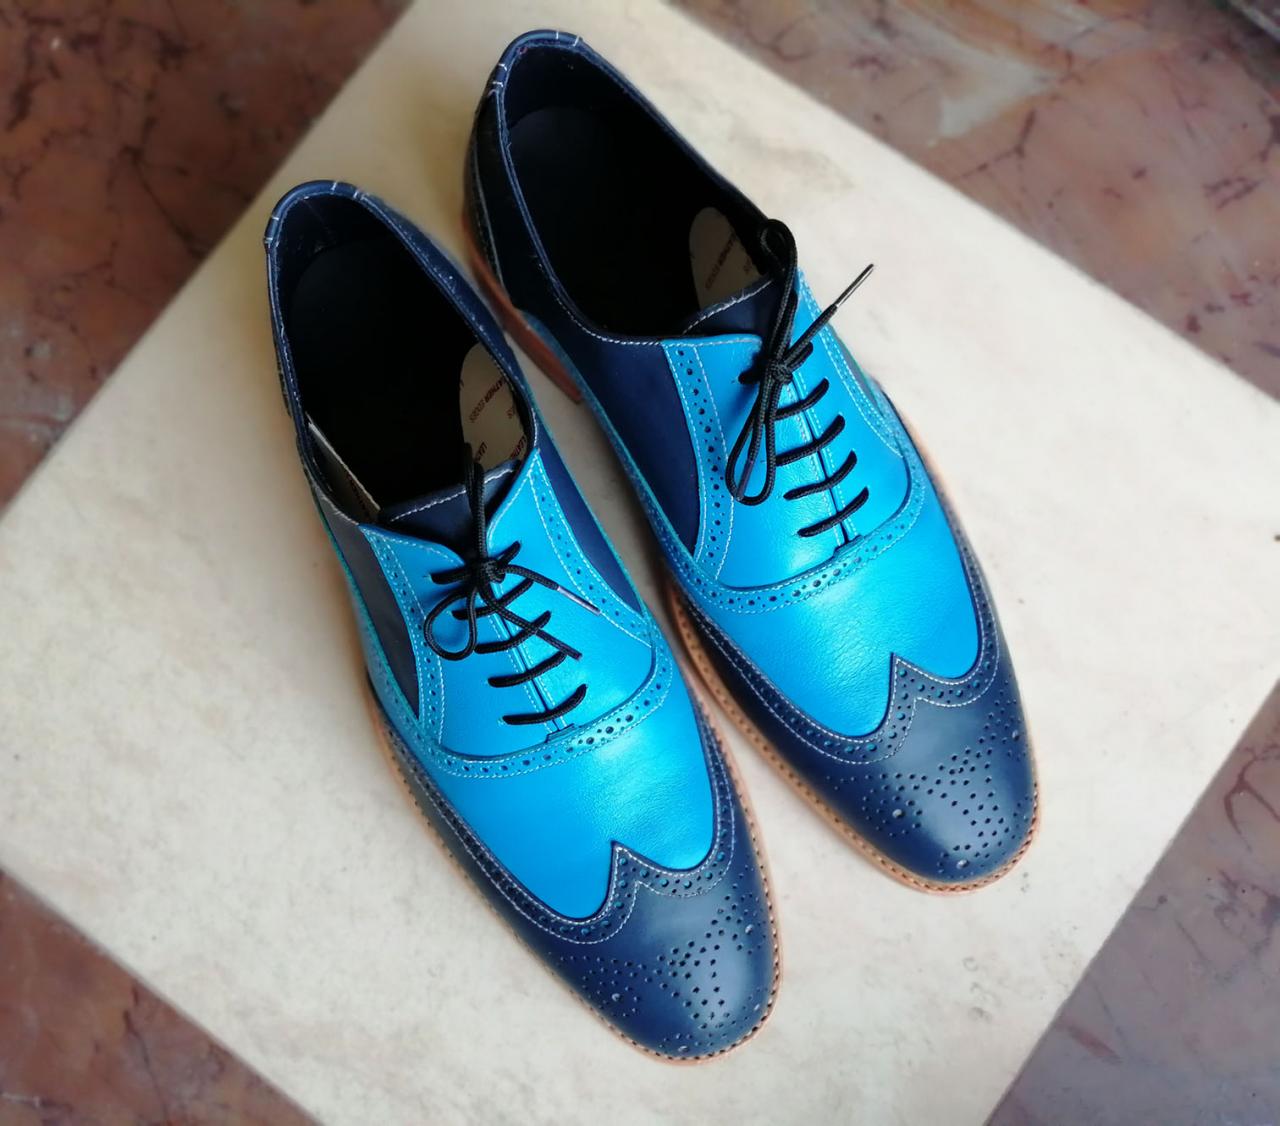 Balmoral Blue Full Brogue Wingtip Contrast Sole Real Leather Formal Lace Up Men Dress Shoes